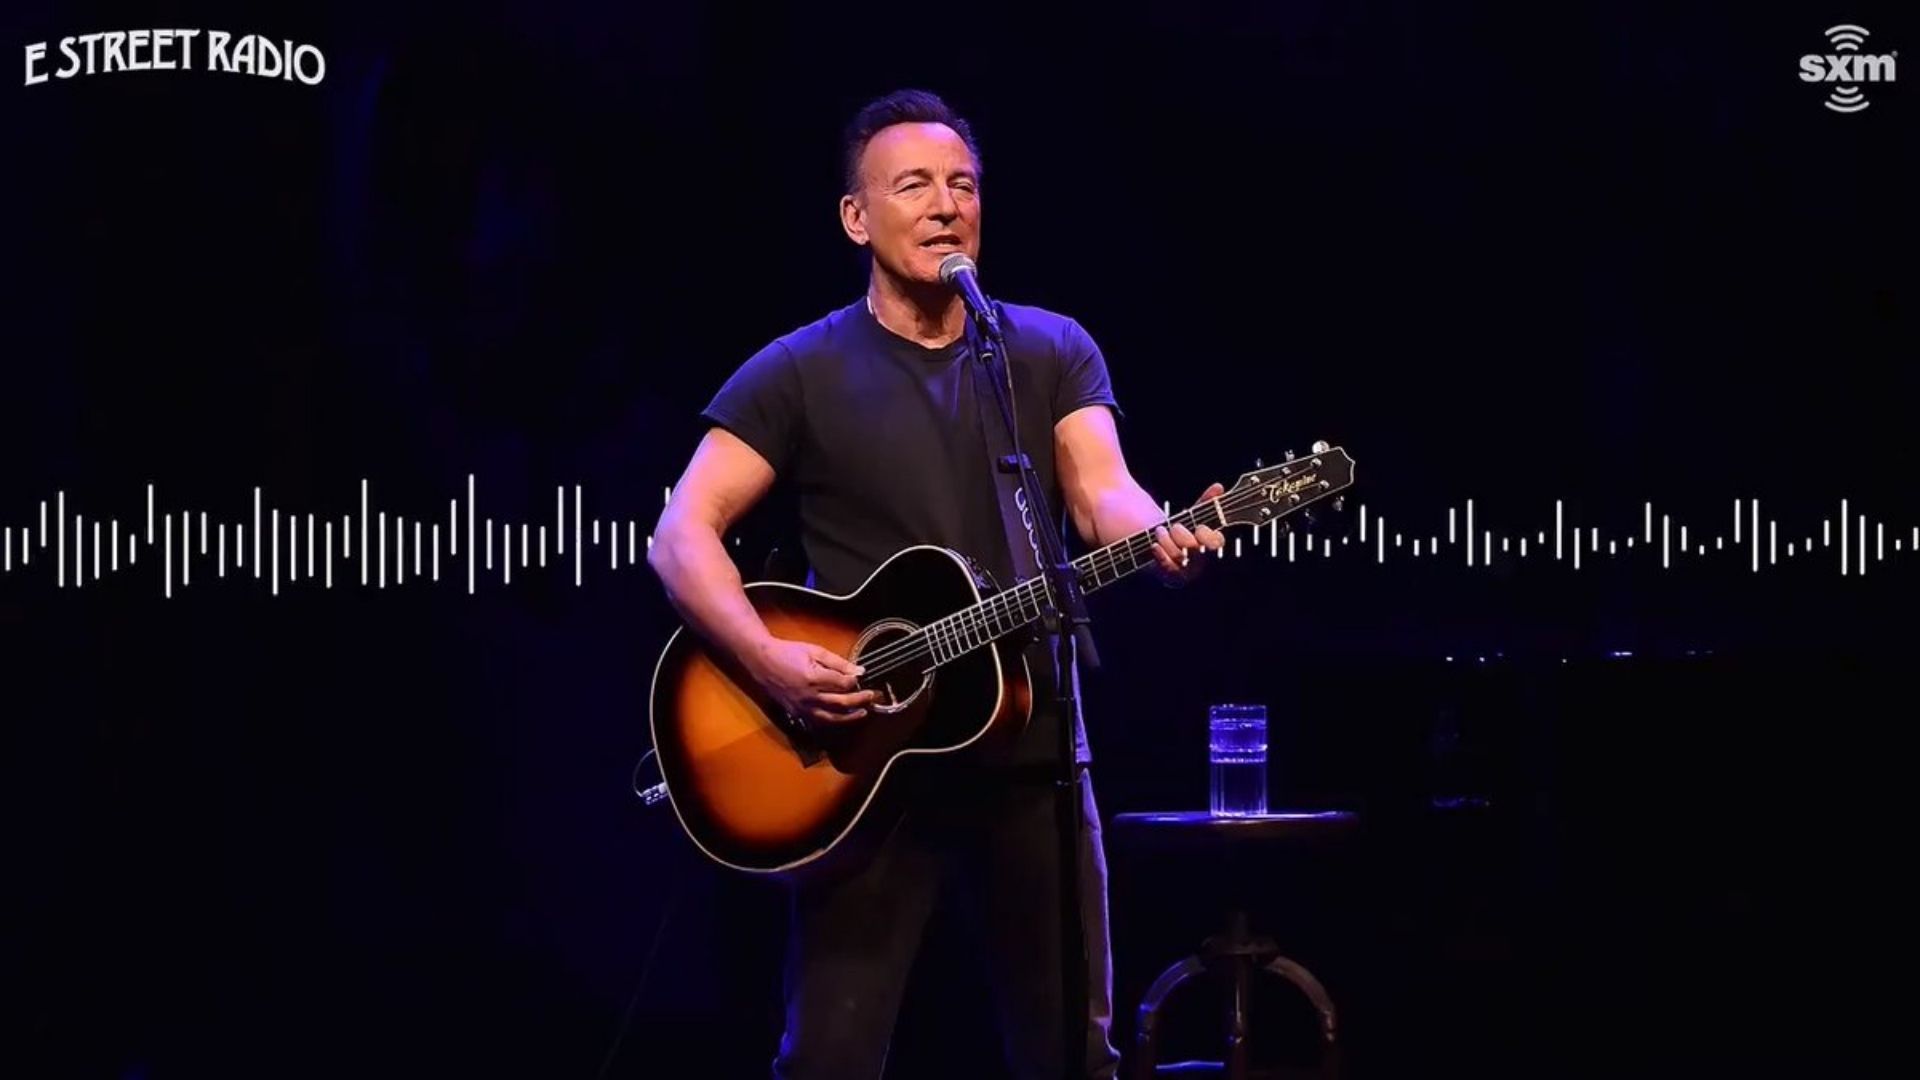 Forbes highest paid entertainers: Bruce Springsteen